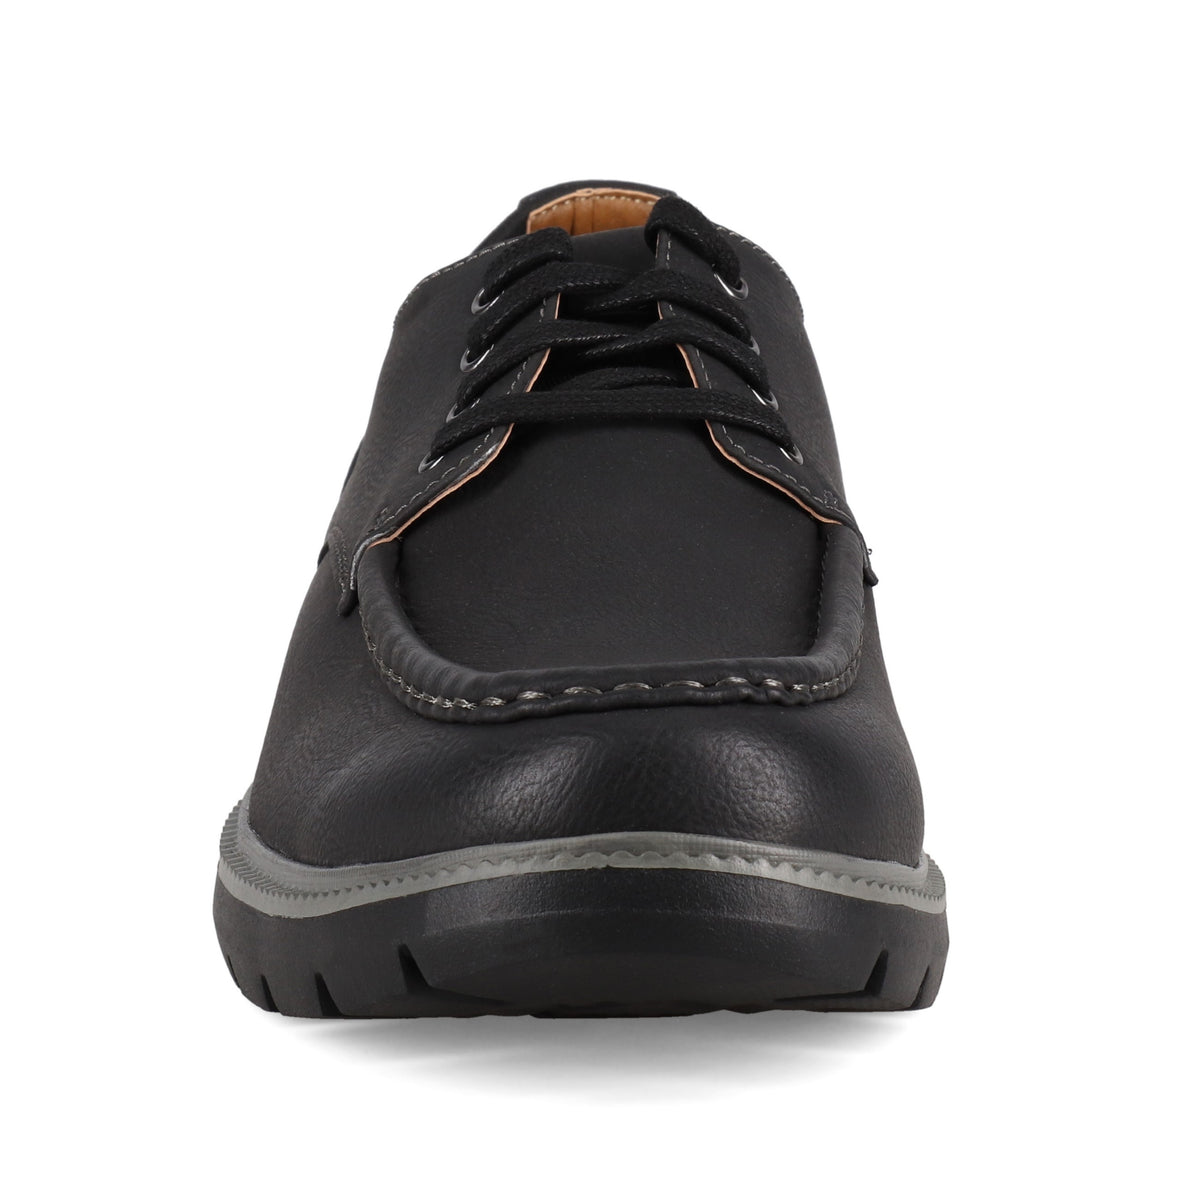 Dockers Shoes Rooney Black Shoes